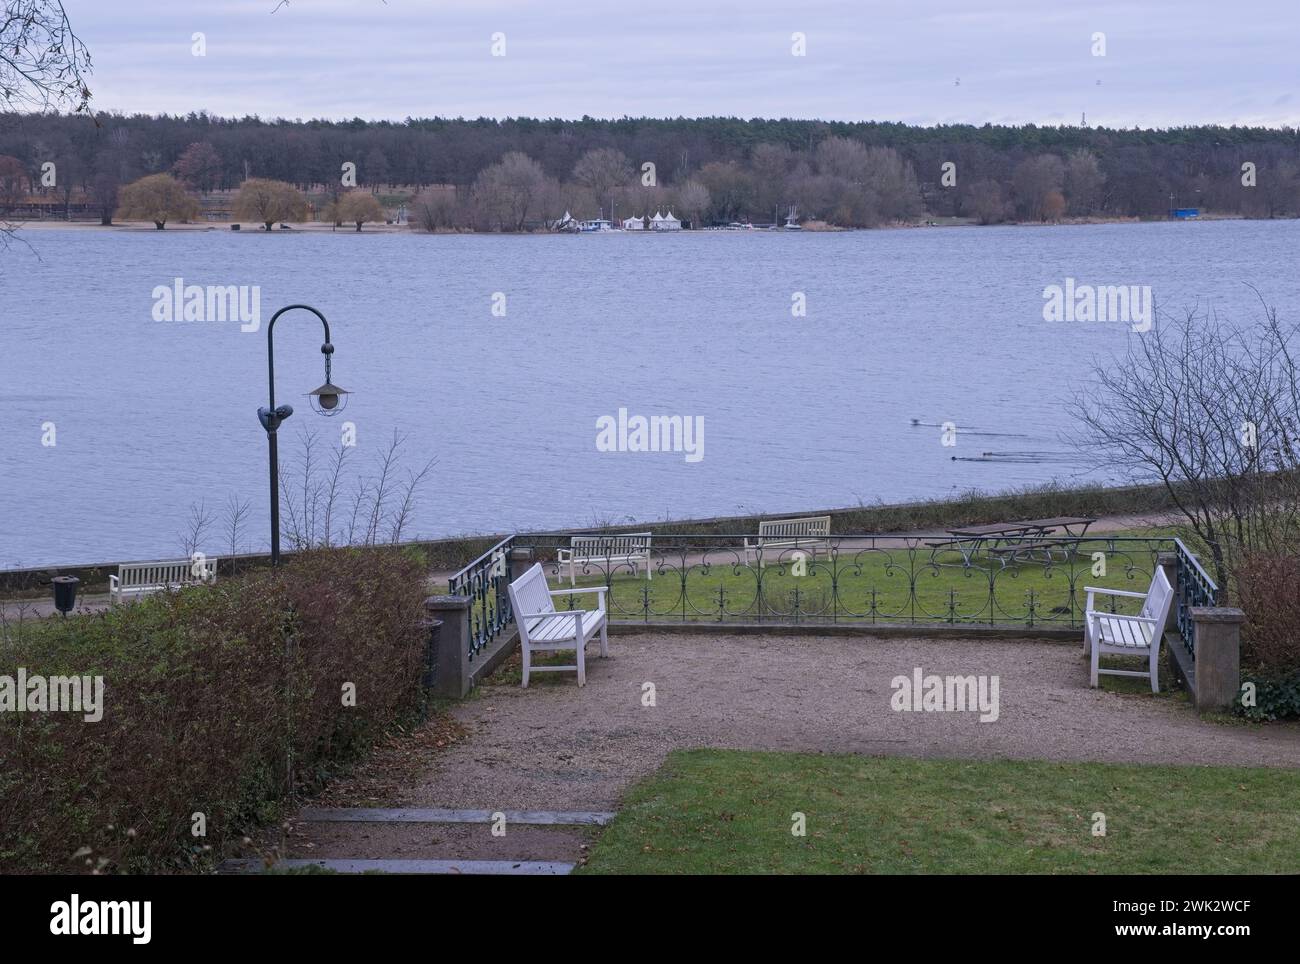 Berlin, Germany - Jan 22, 2024: Holocaust memorial and museum known as the Haus der Wannsee-Konferenz (House of the Wannsee Conference). Cloudy winter Stock Photo